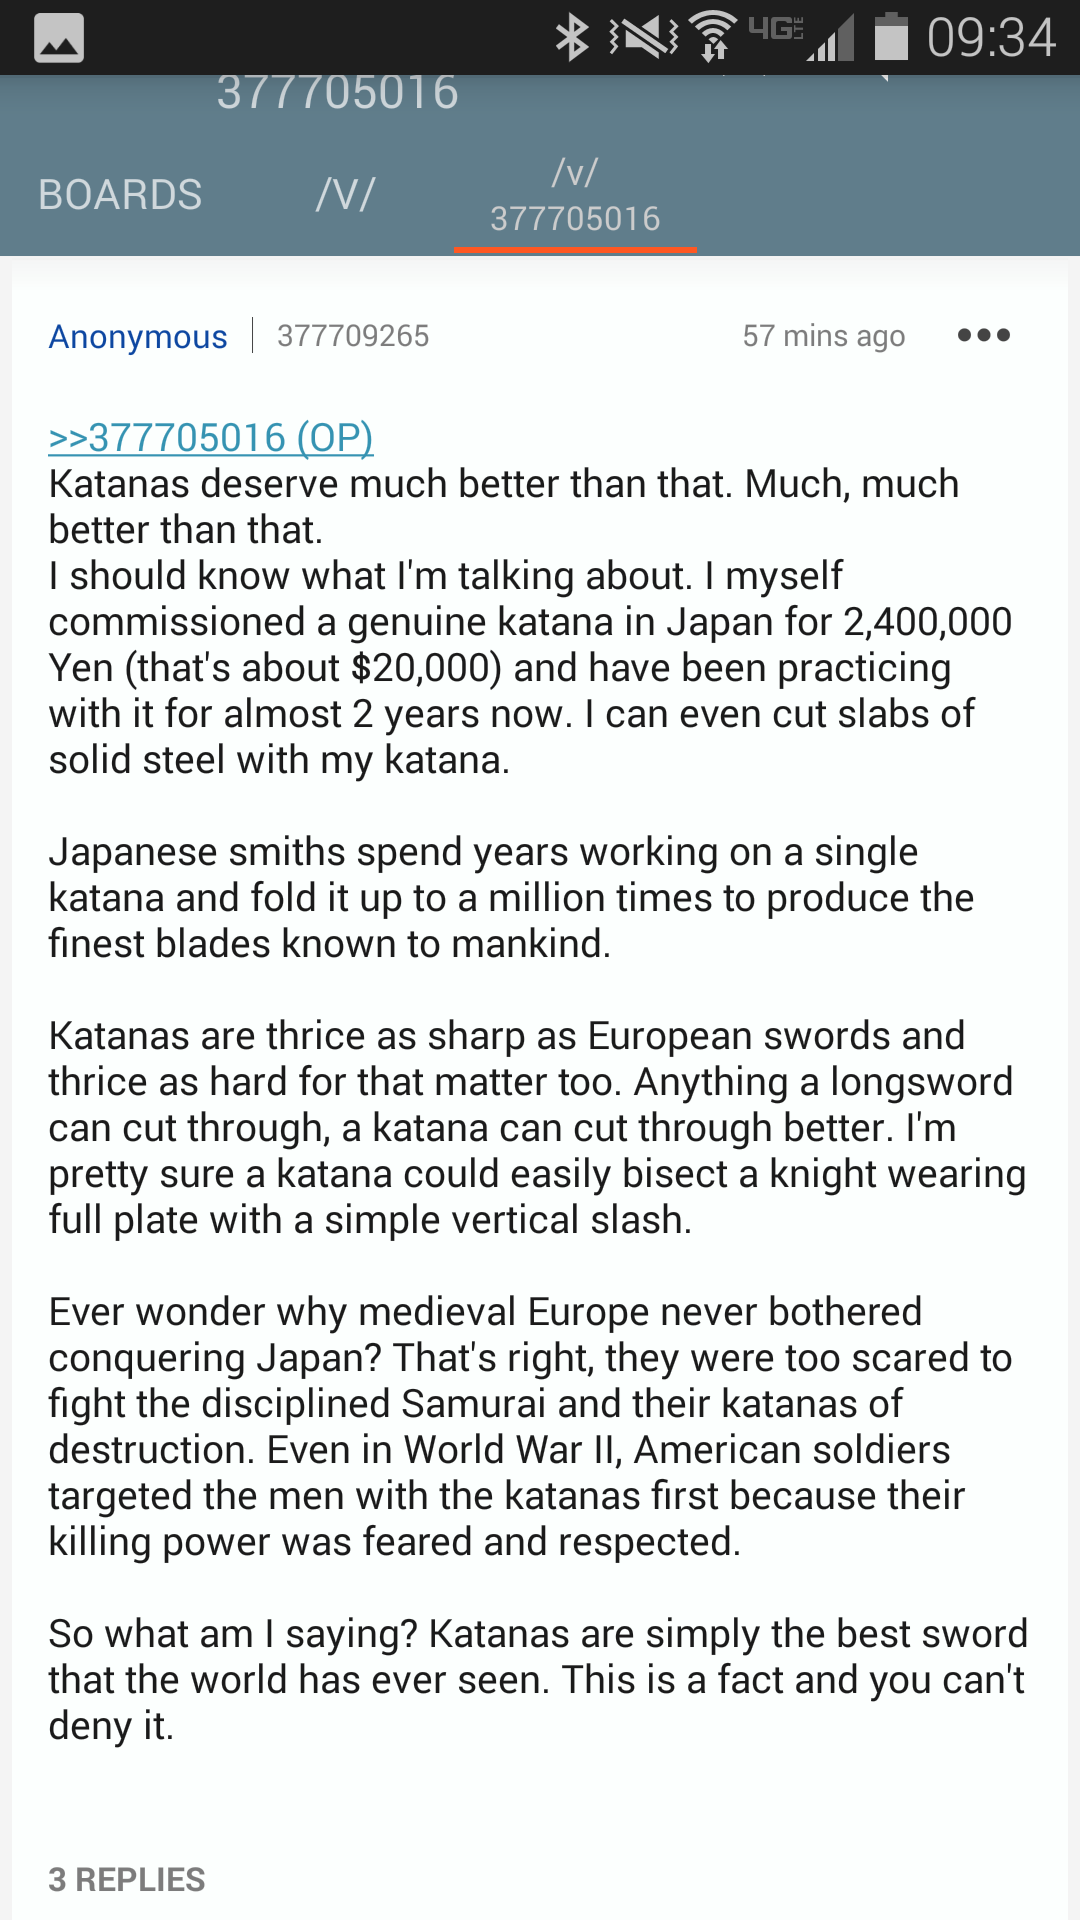 Rant about how awesome Katana swords are.